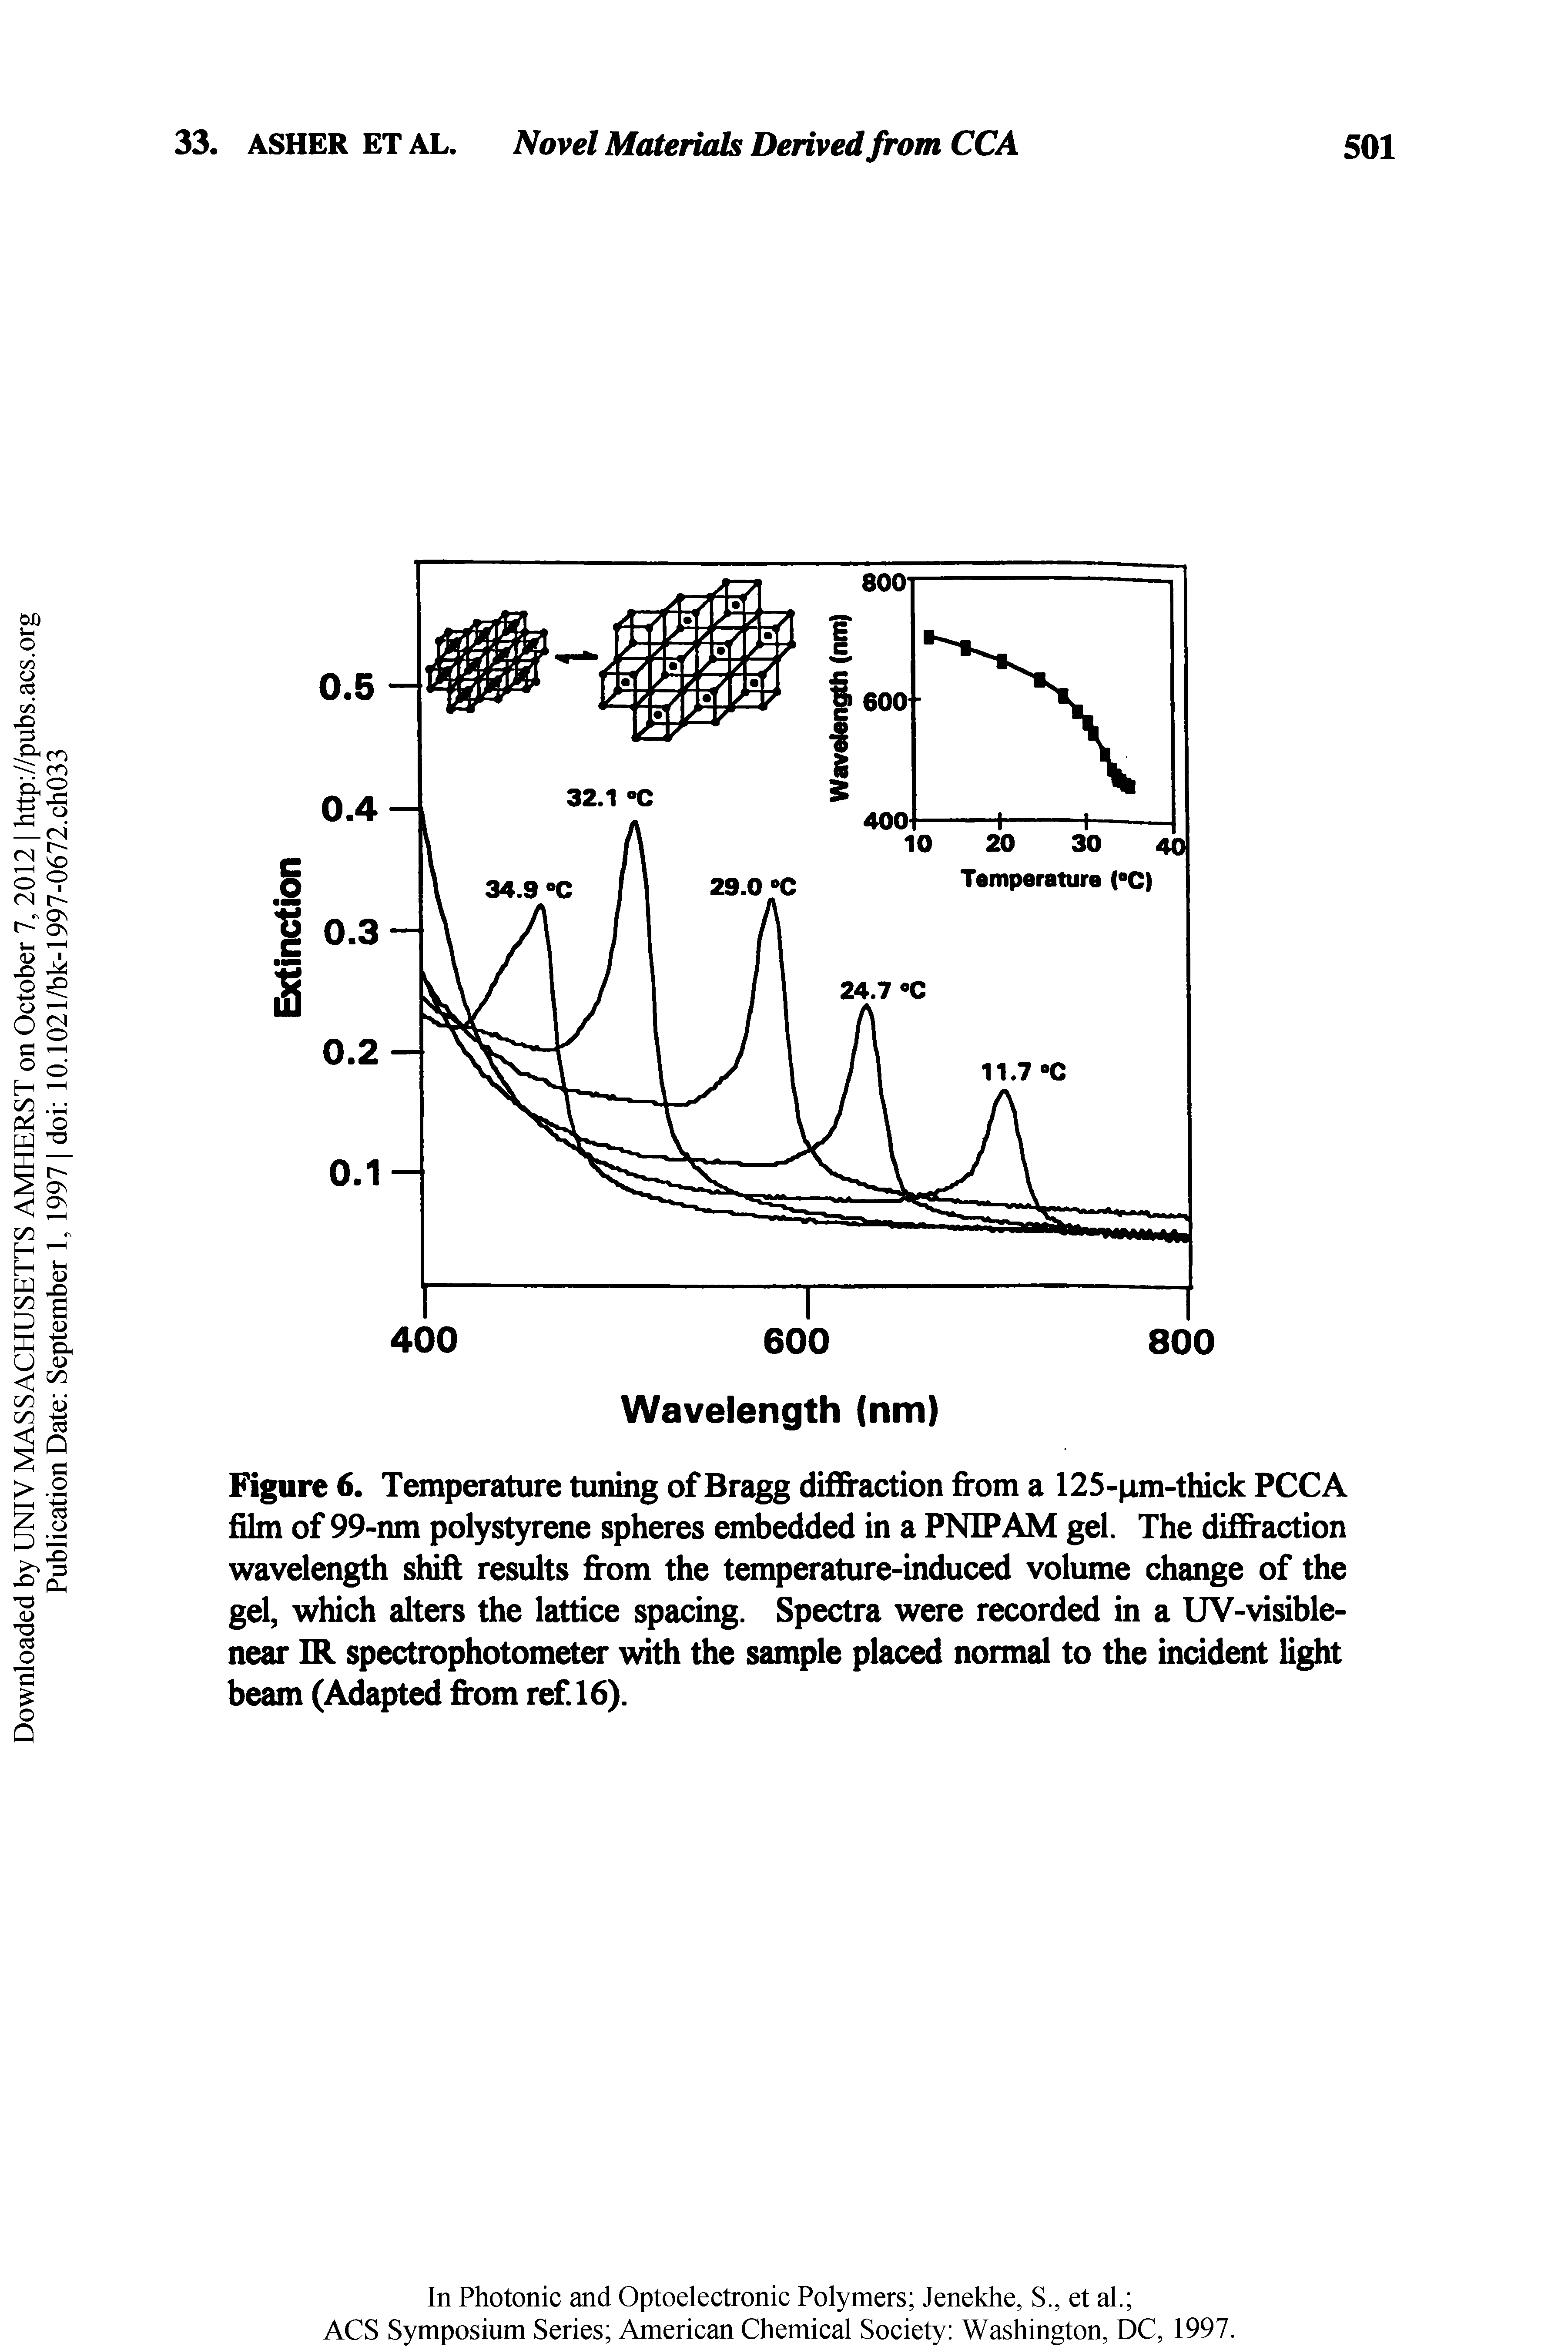 Figure 6. Temperature tuning of Bragg diffraction from a 125-p,m-thick PCCA film of 99-nm polystyrene spheres embedded in a PNIPAM gel. The diffraction wavelength shift results from the temperature-induced volume change of the gel, which alters the lattice spacing. Spectra were recorded in a UV-visible-near IR spectrophotometer with the sample placed normal to the incident light beam (Adapted from ref 16).